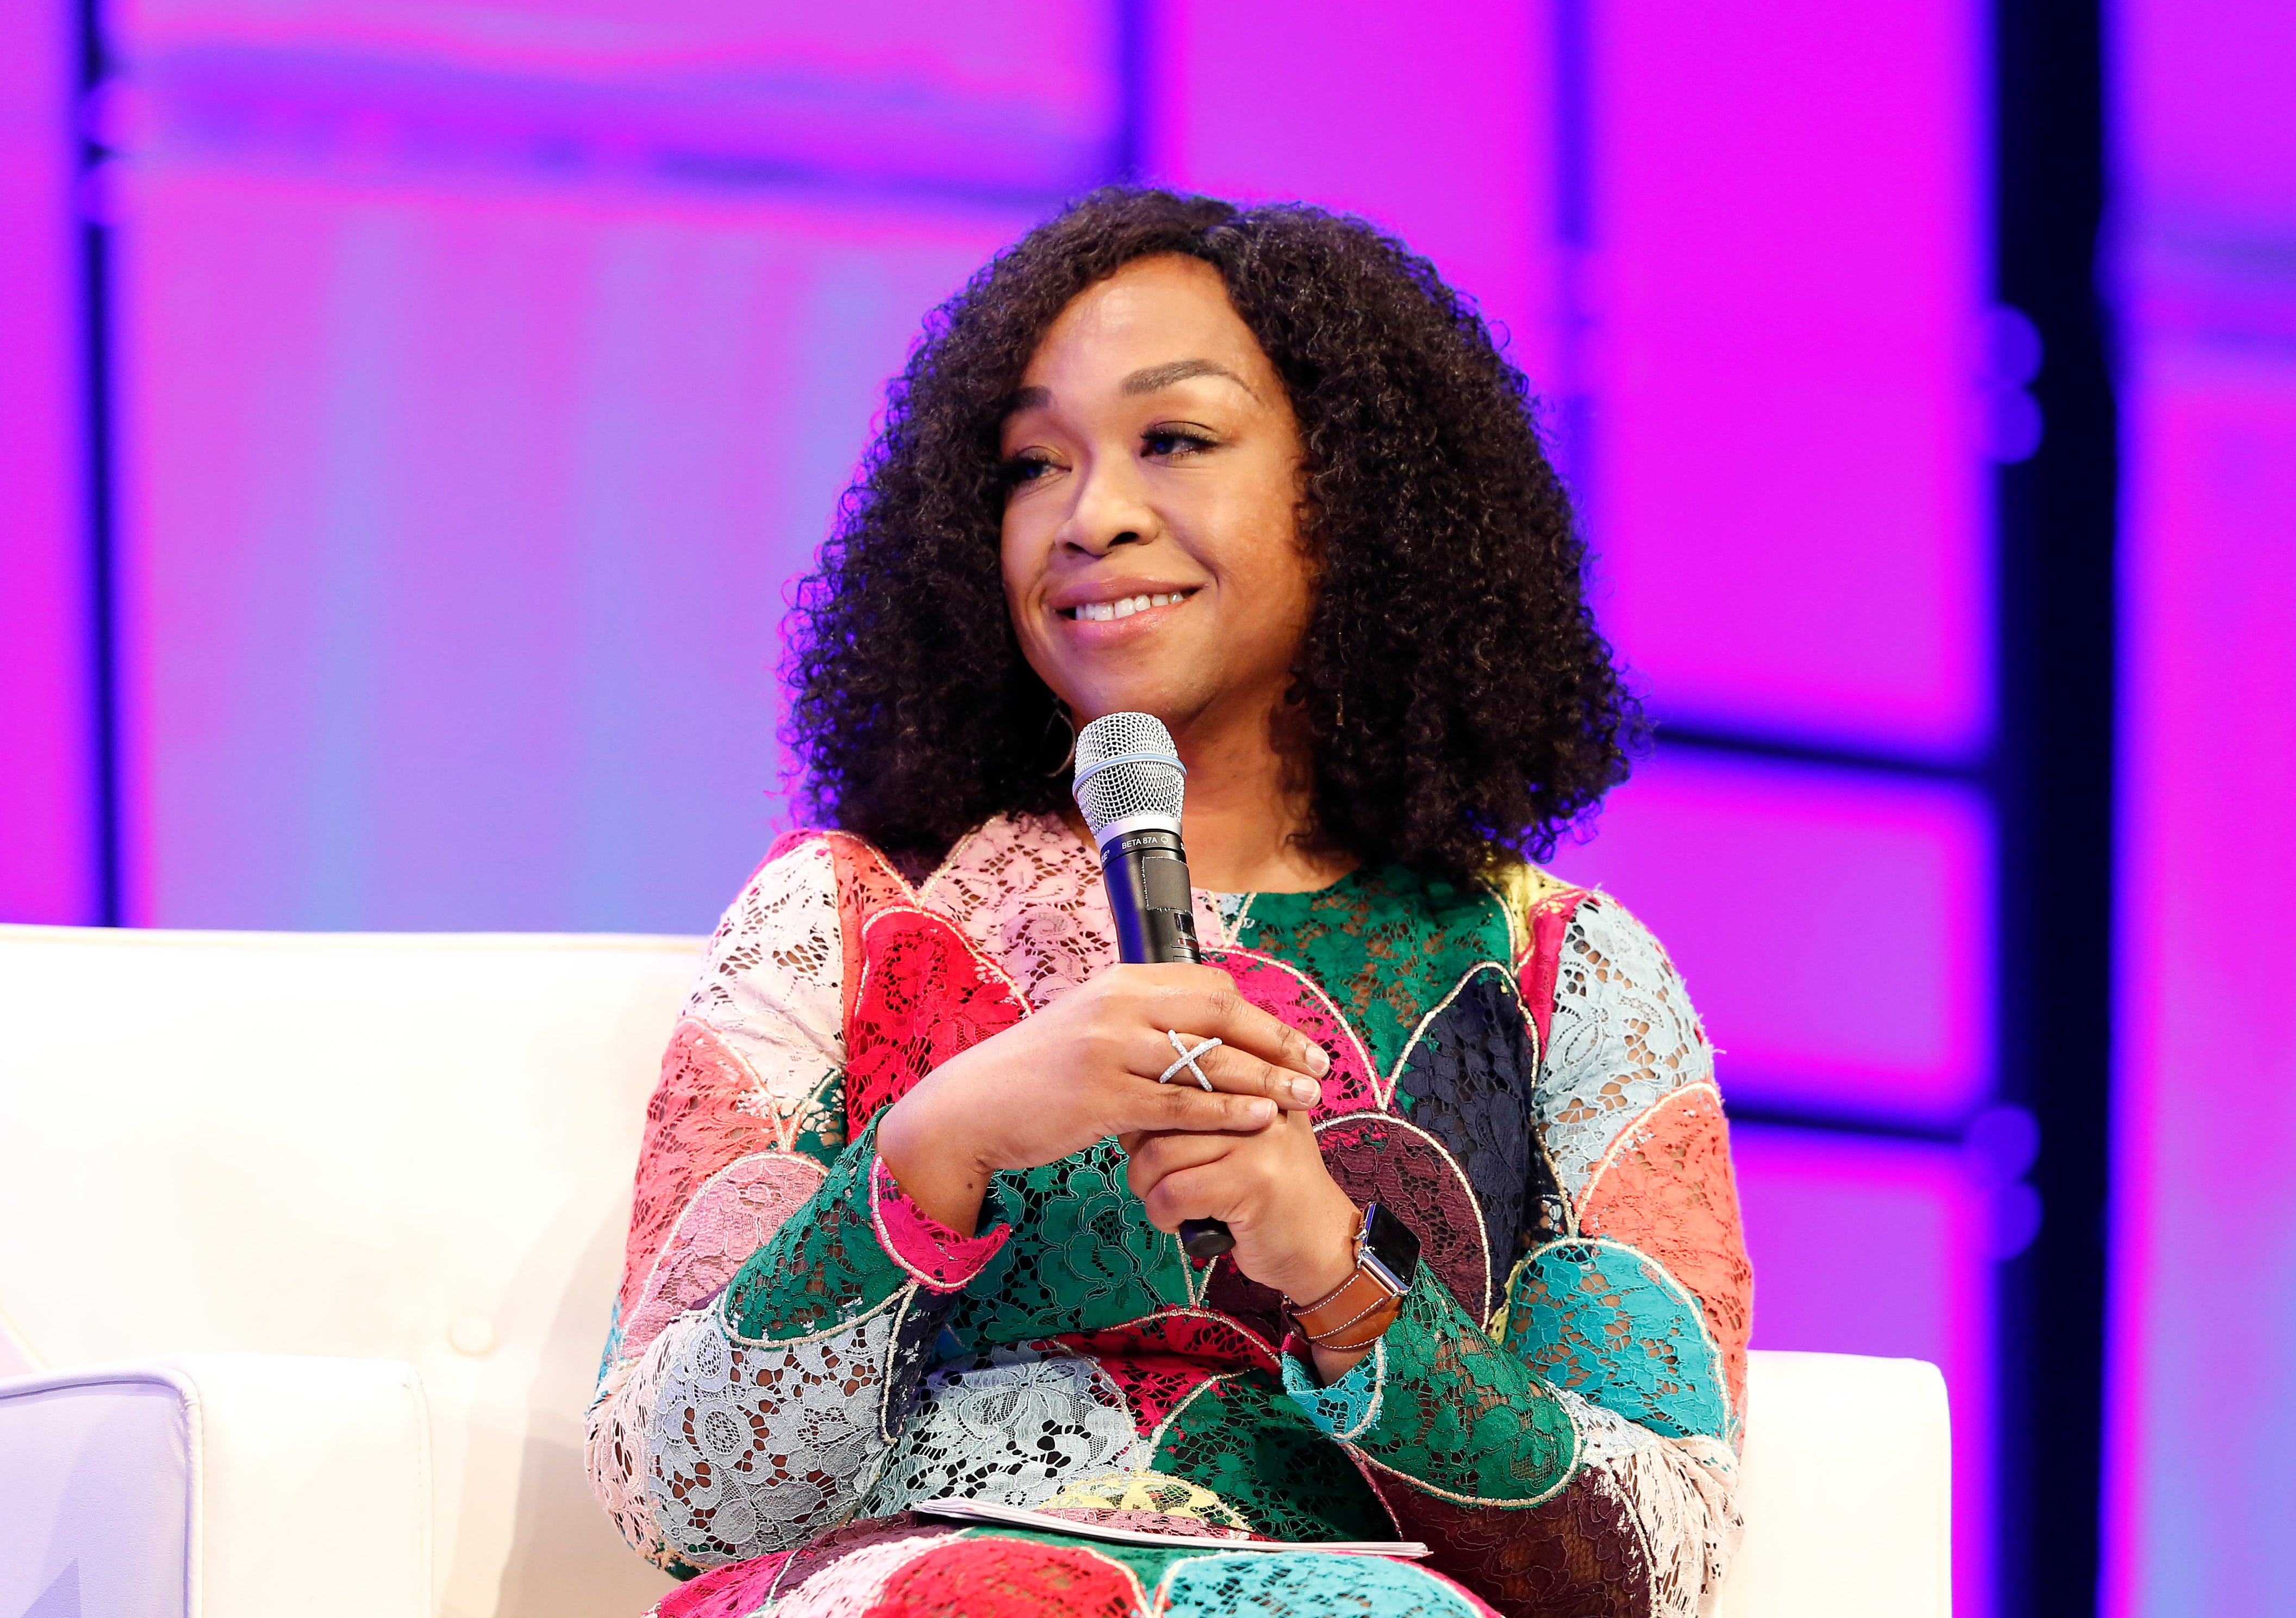 Shonda Rhimes Is The Third Black Woman Inducted To The Television Hall Of Fame